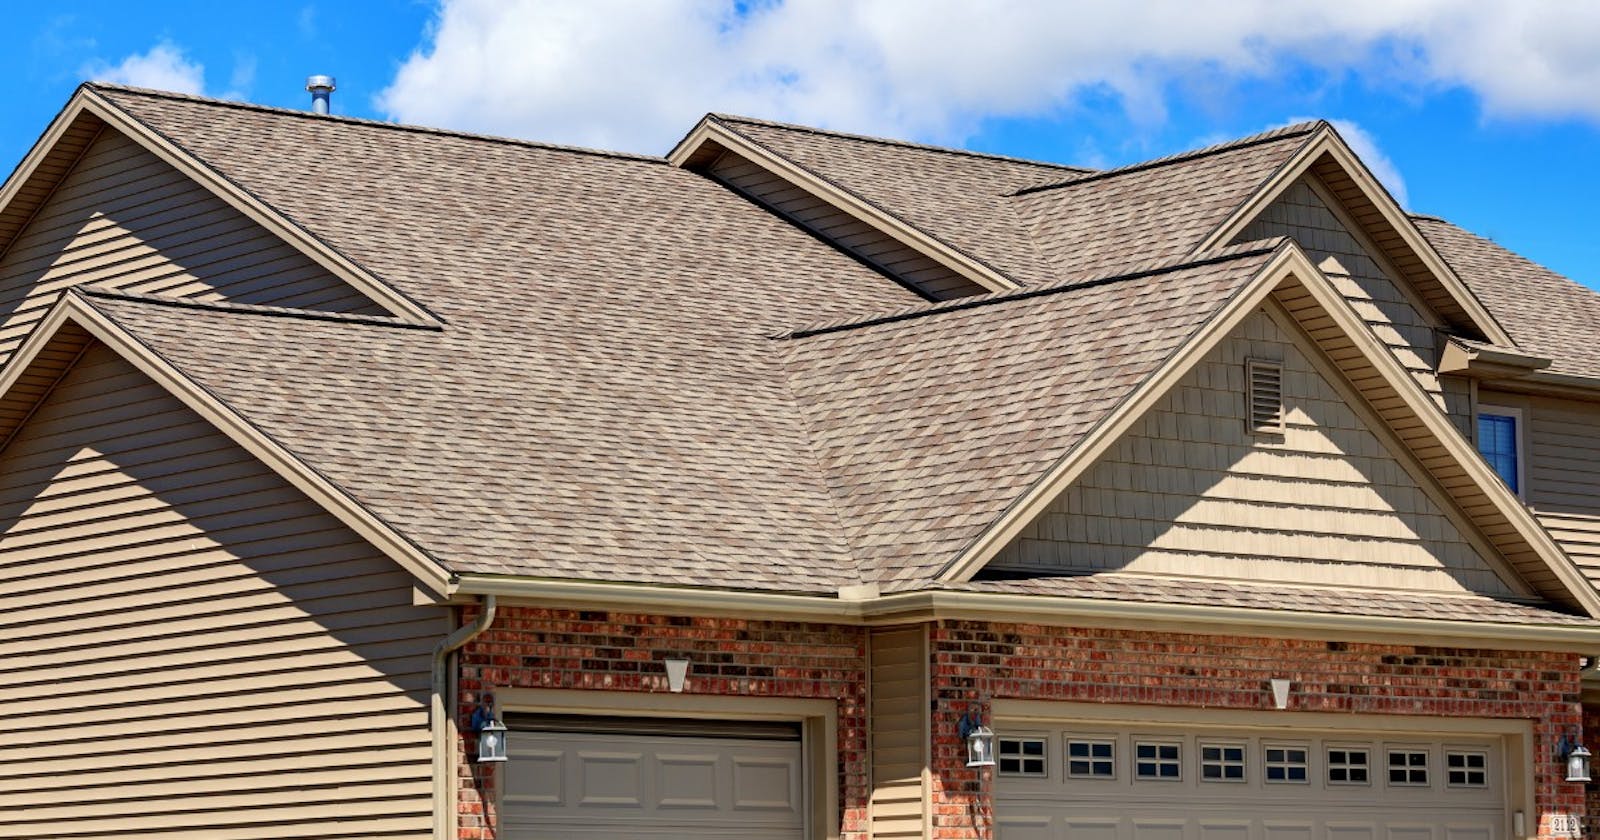 Securing Your Home: The Premier Residential Roofing Company